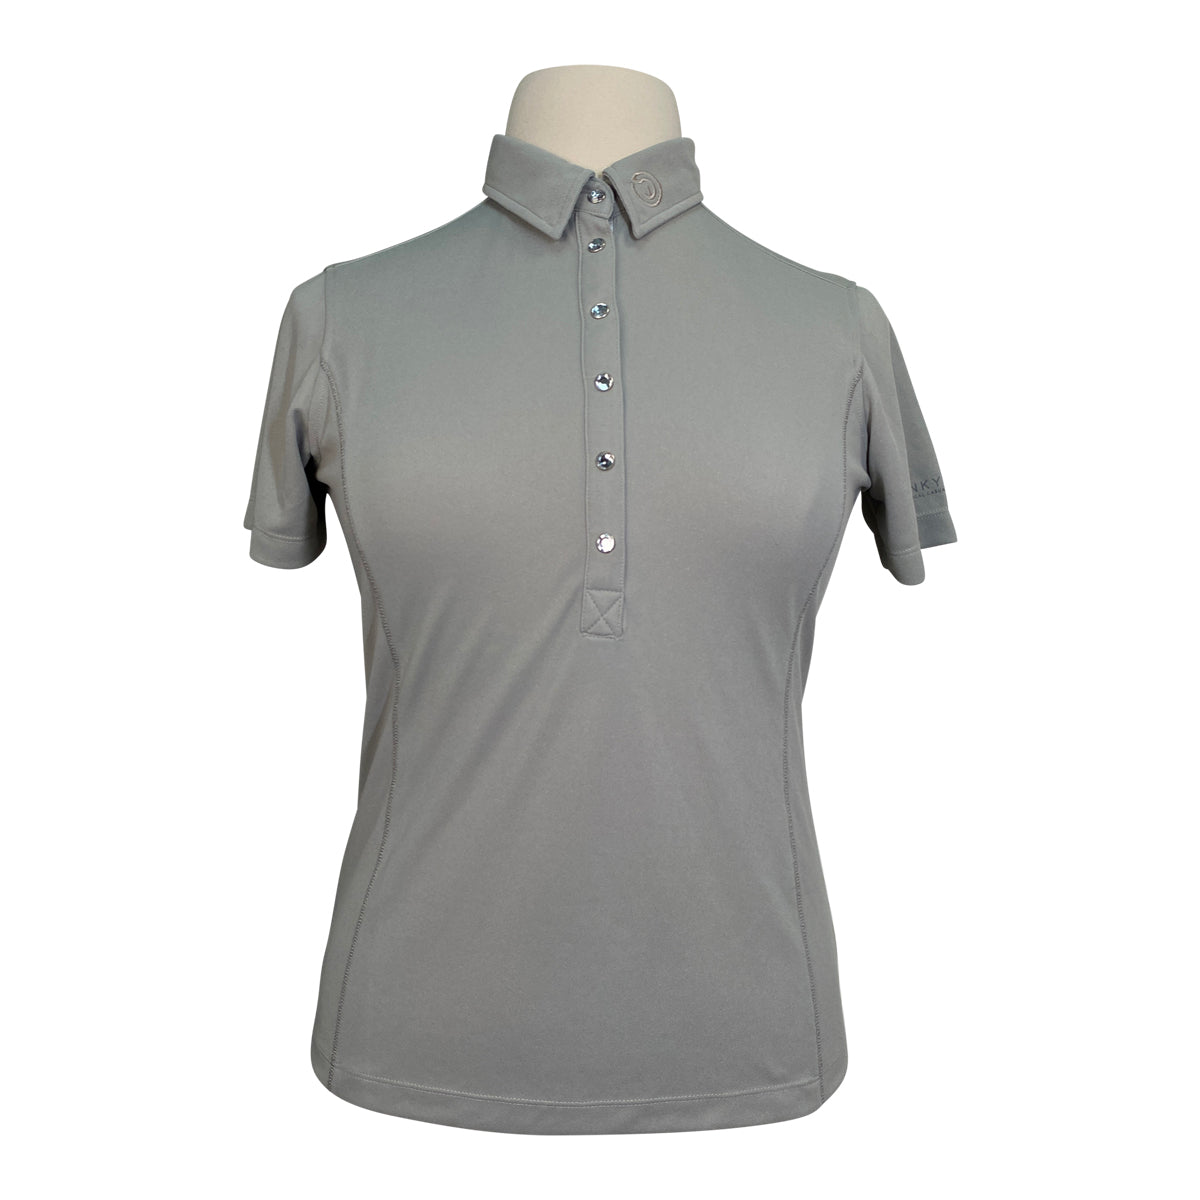 Anky Essential Polo Shirt in Moss/Glitter